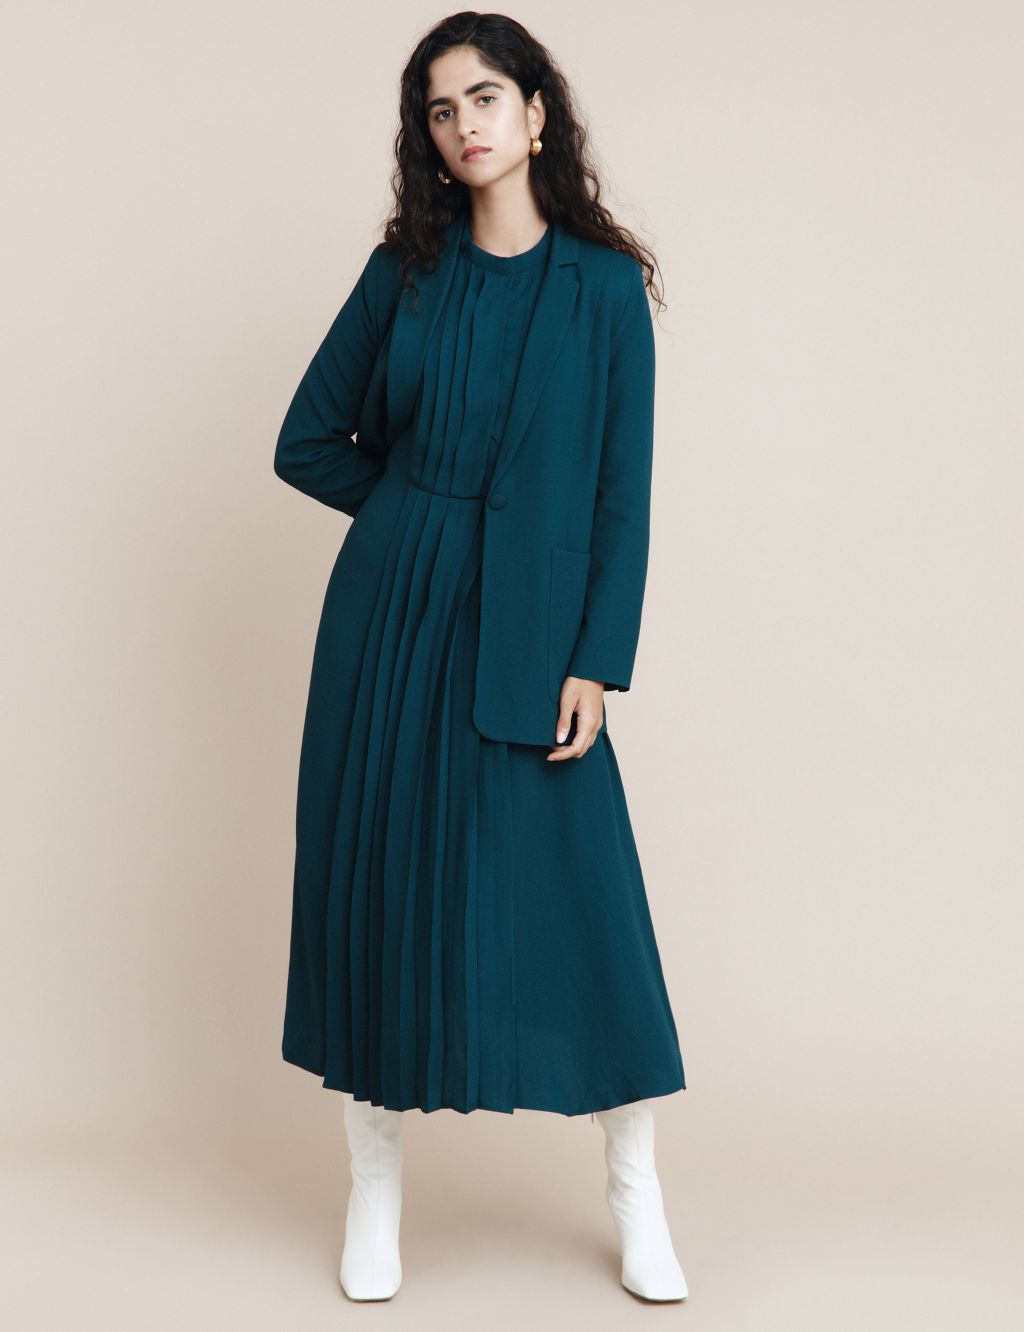 Crepe High Neck Pleated Midaxi Swing Dress image 8